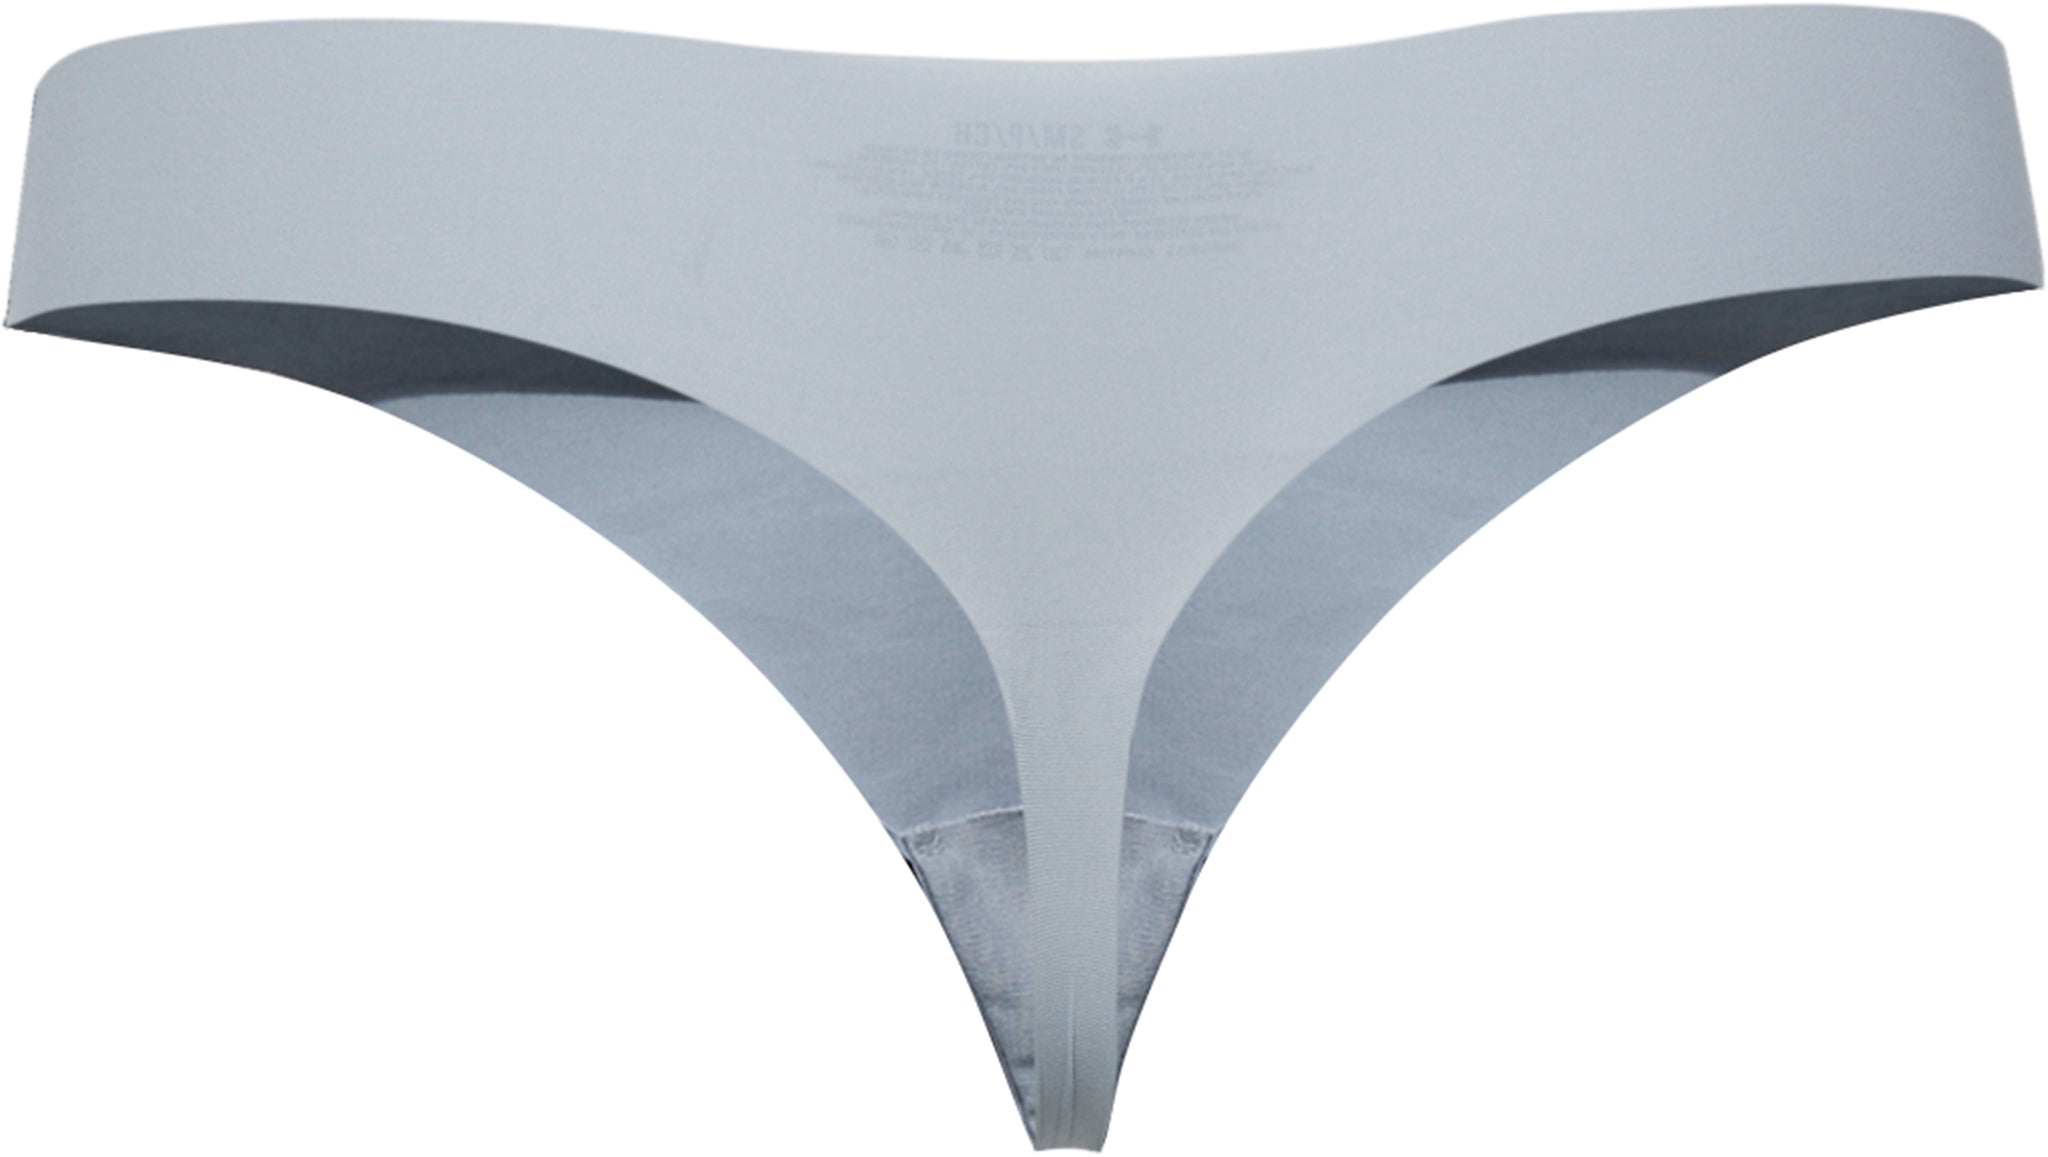 Order Online UA Pure Stretch Thong 3Pack From Under Armour India